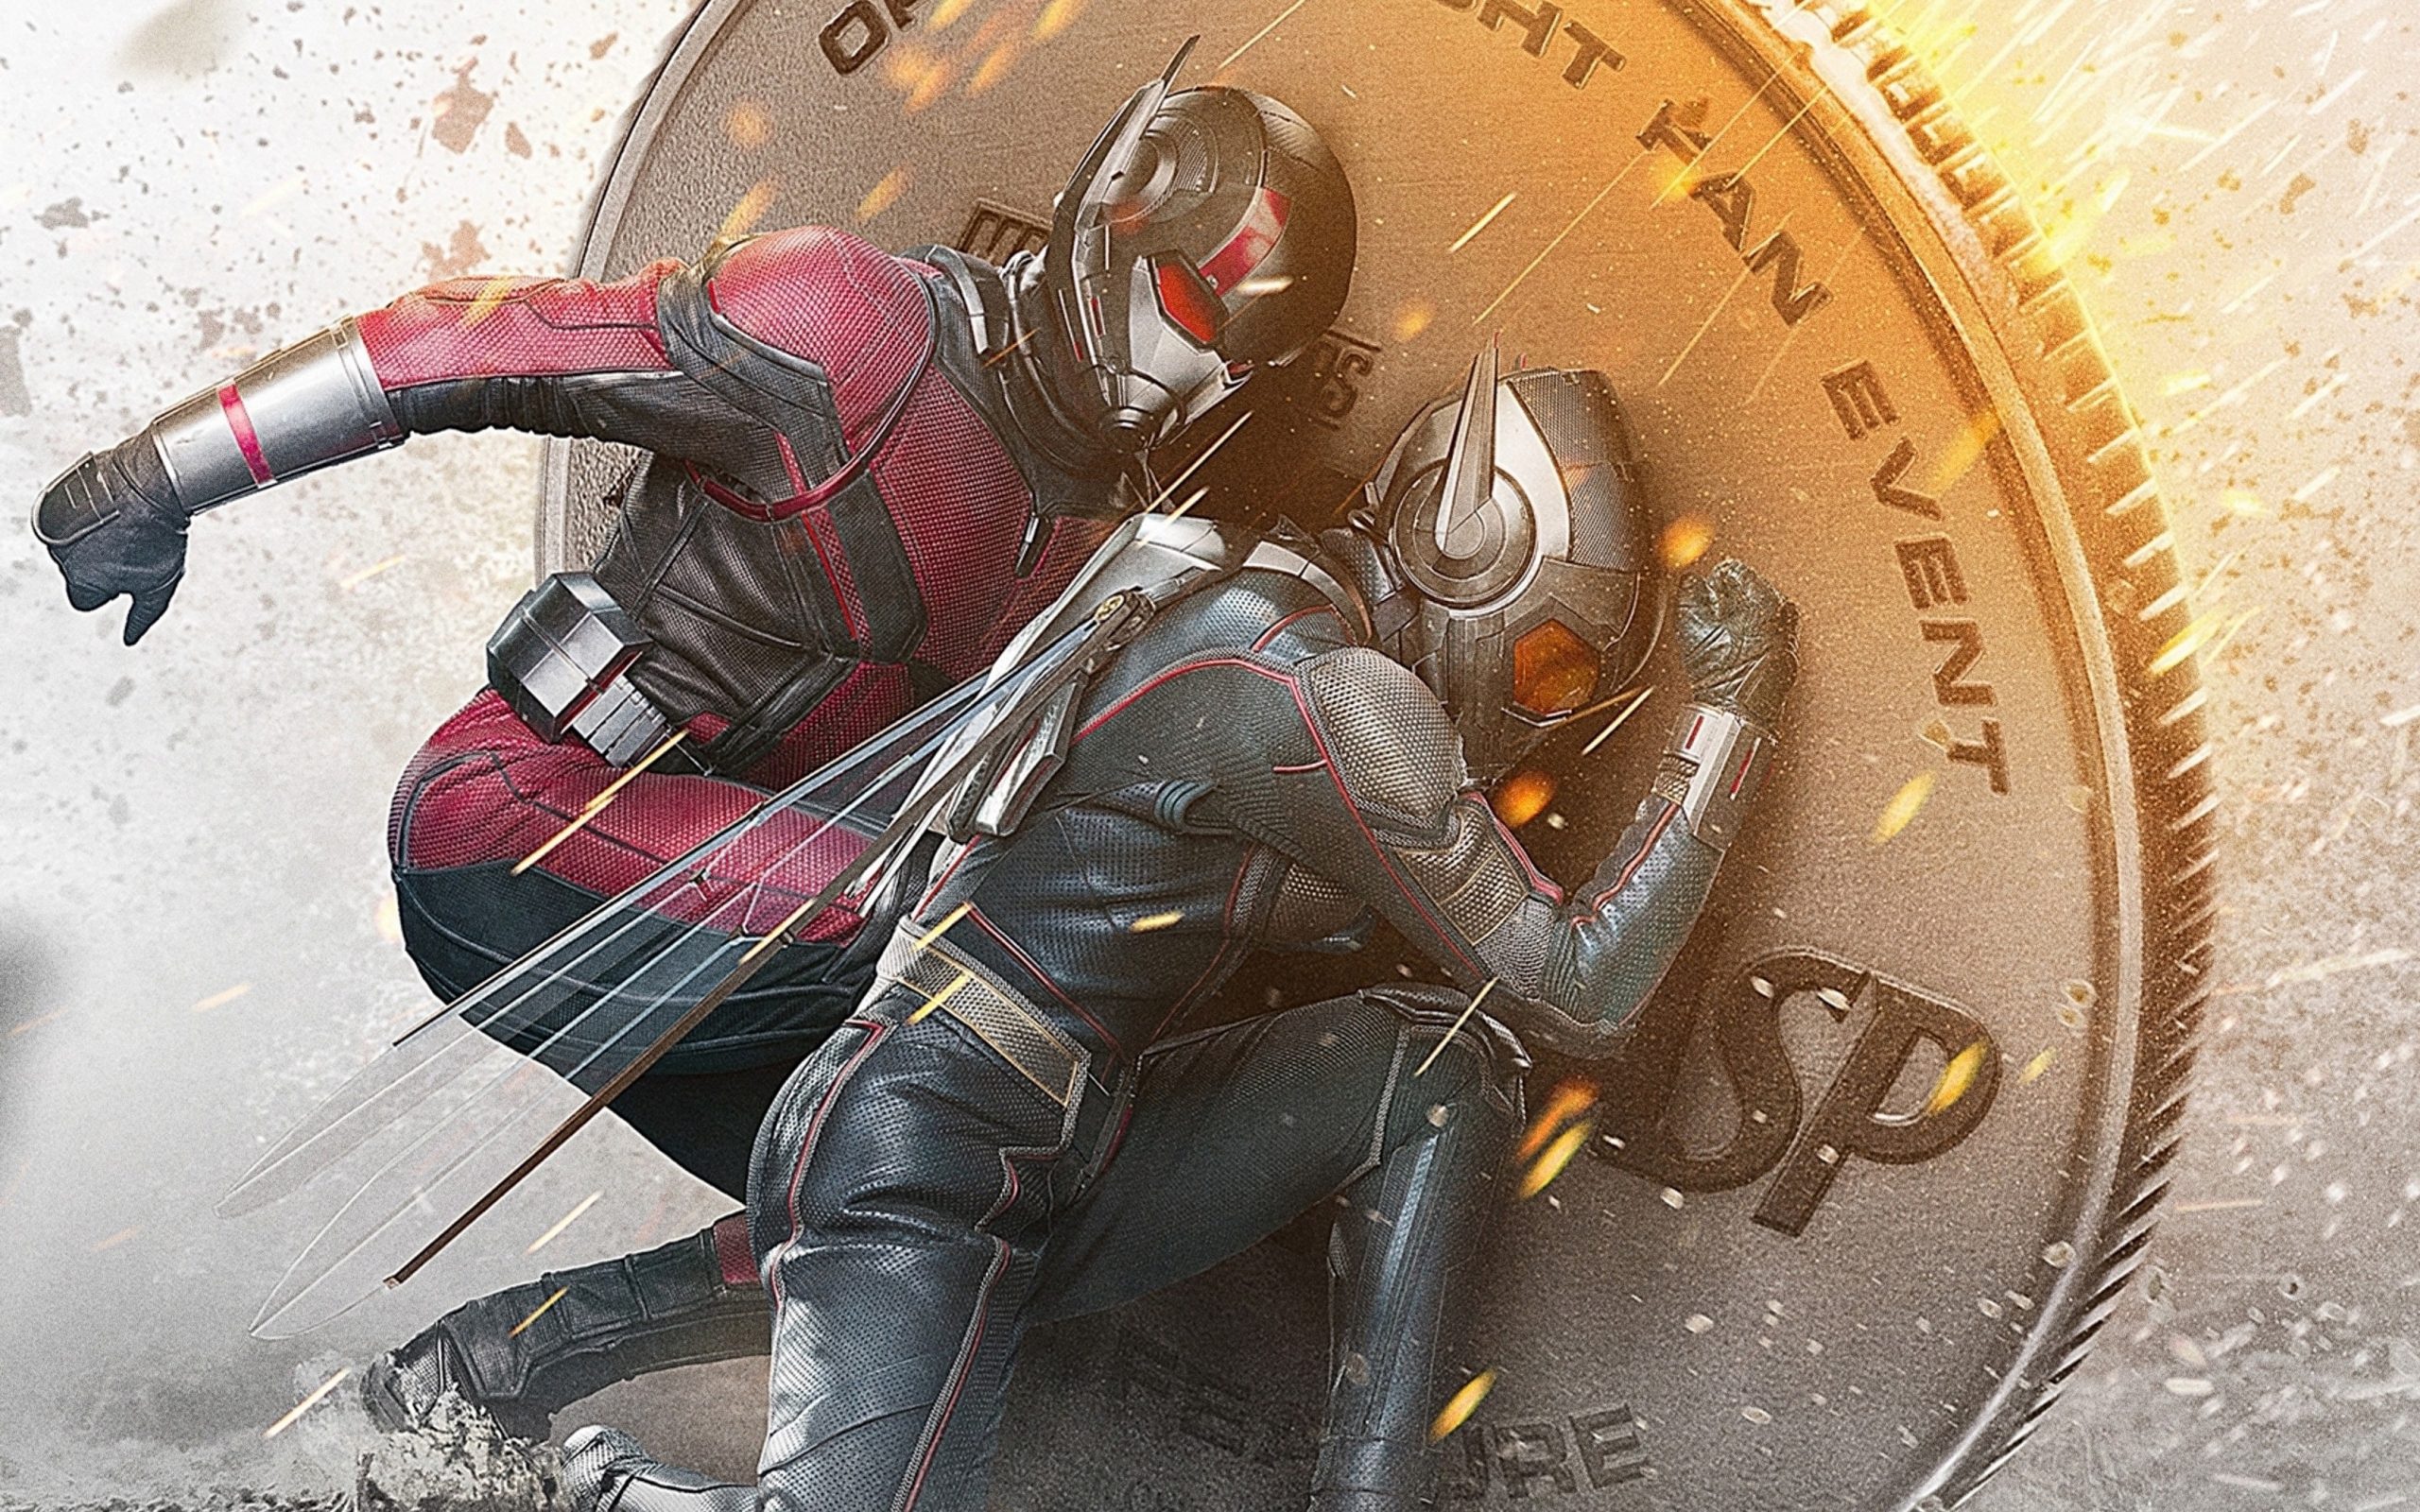 Confirmed: Paul Rudd Confirms ‘Ant-Man 3’ is “In the Works” at Marvel Studios